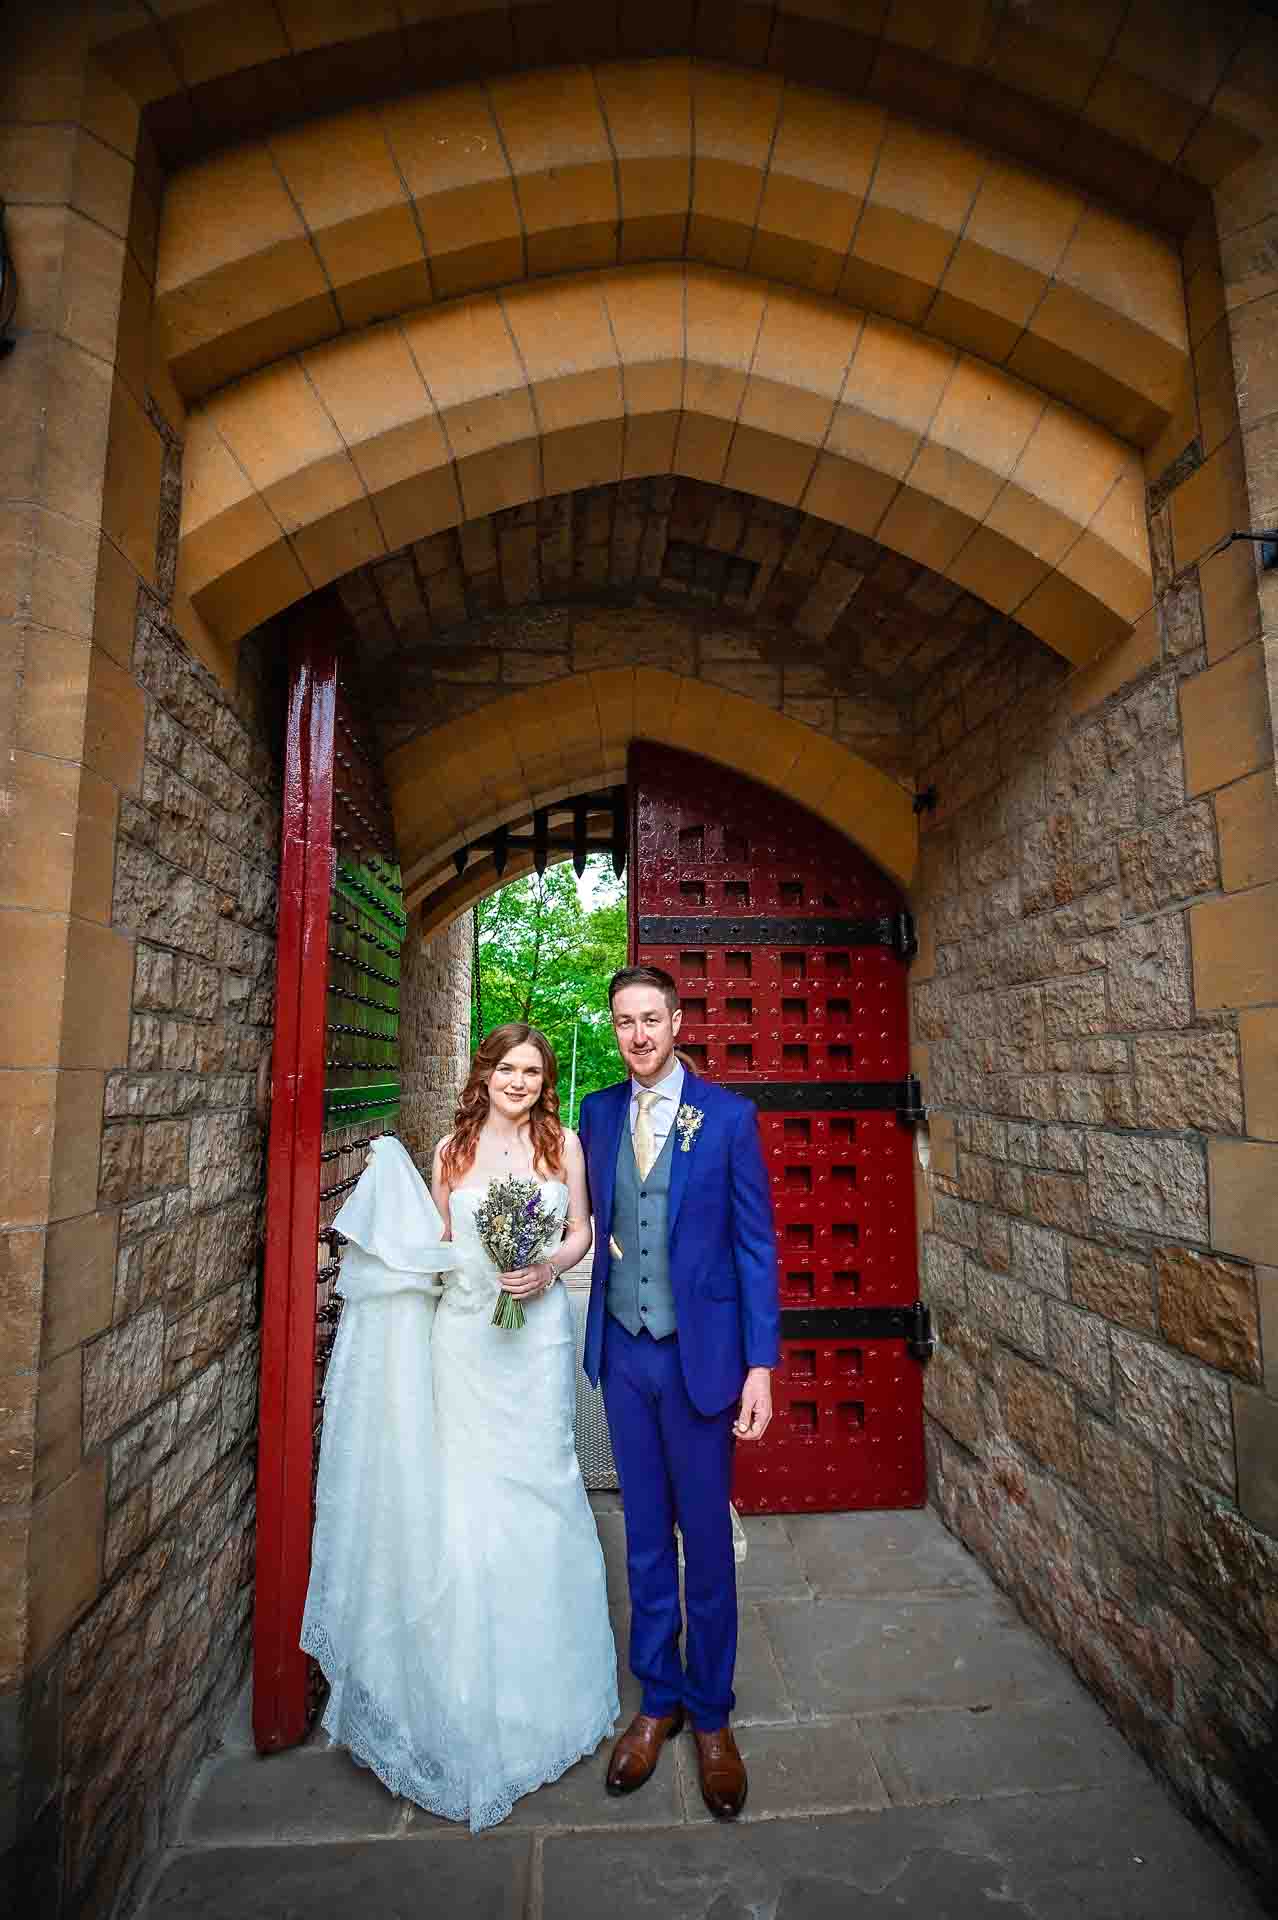 Castell Coch Couple Standing in Entrance with Portcullis